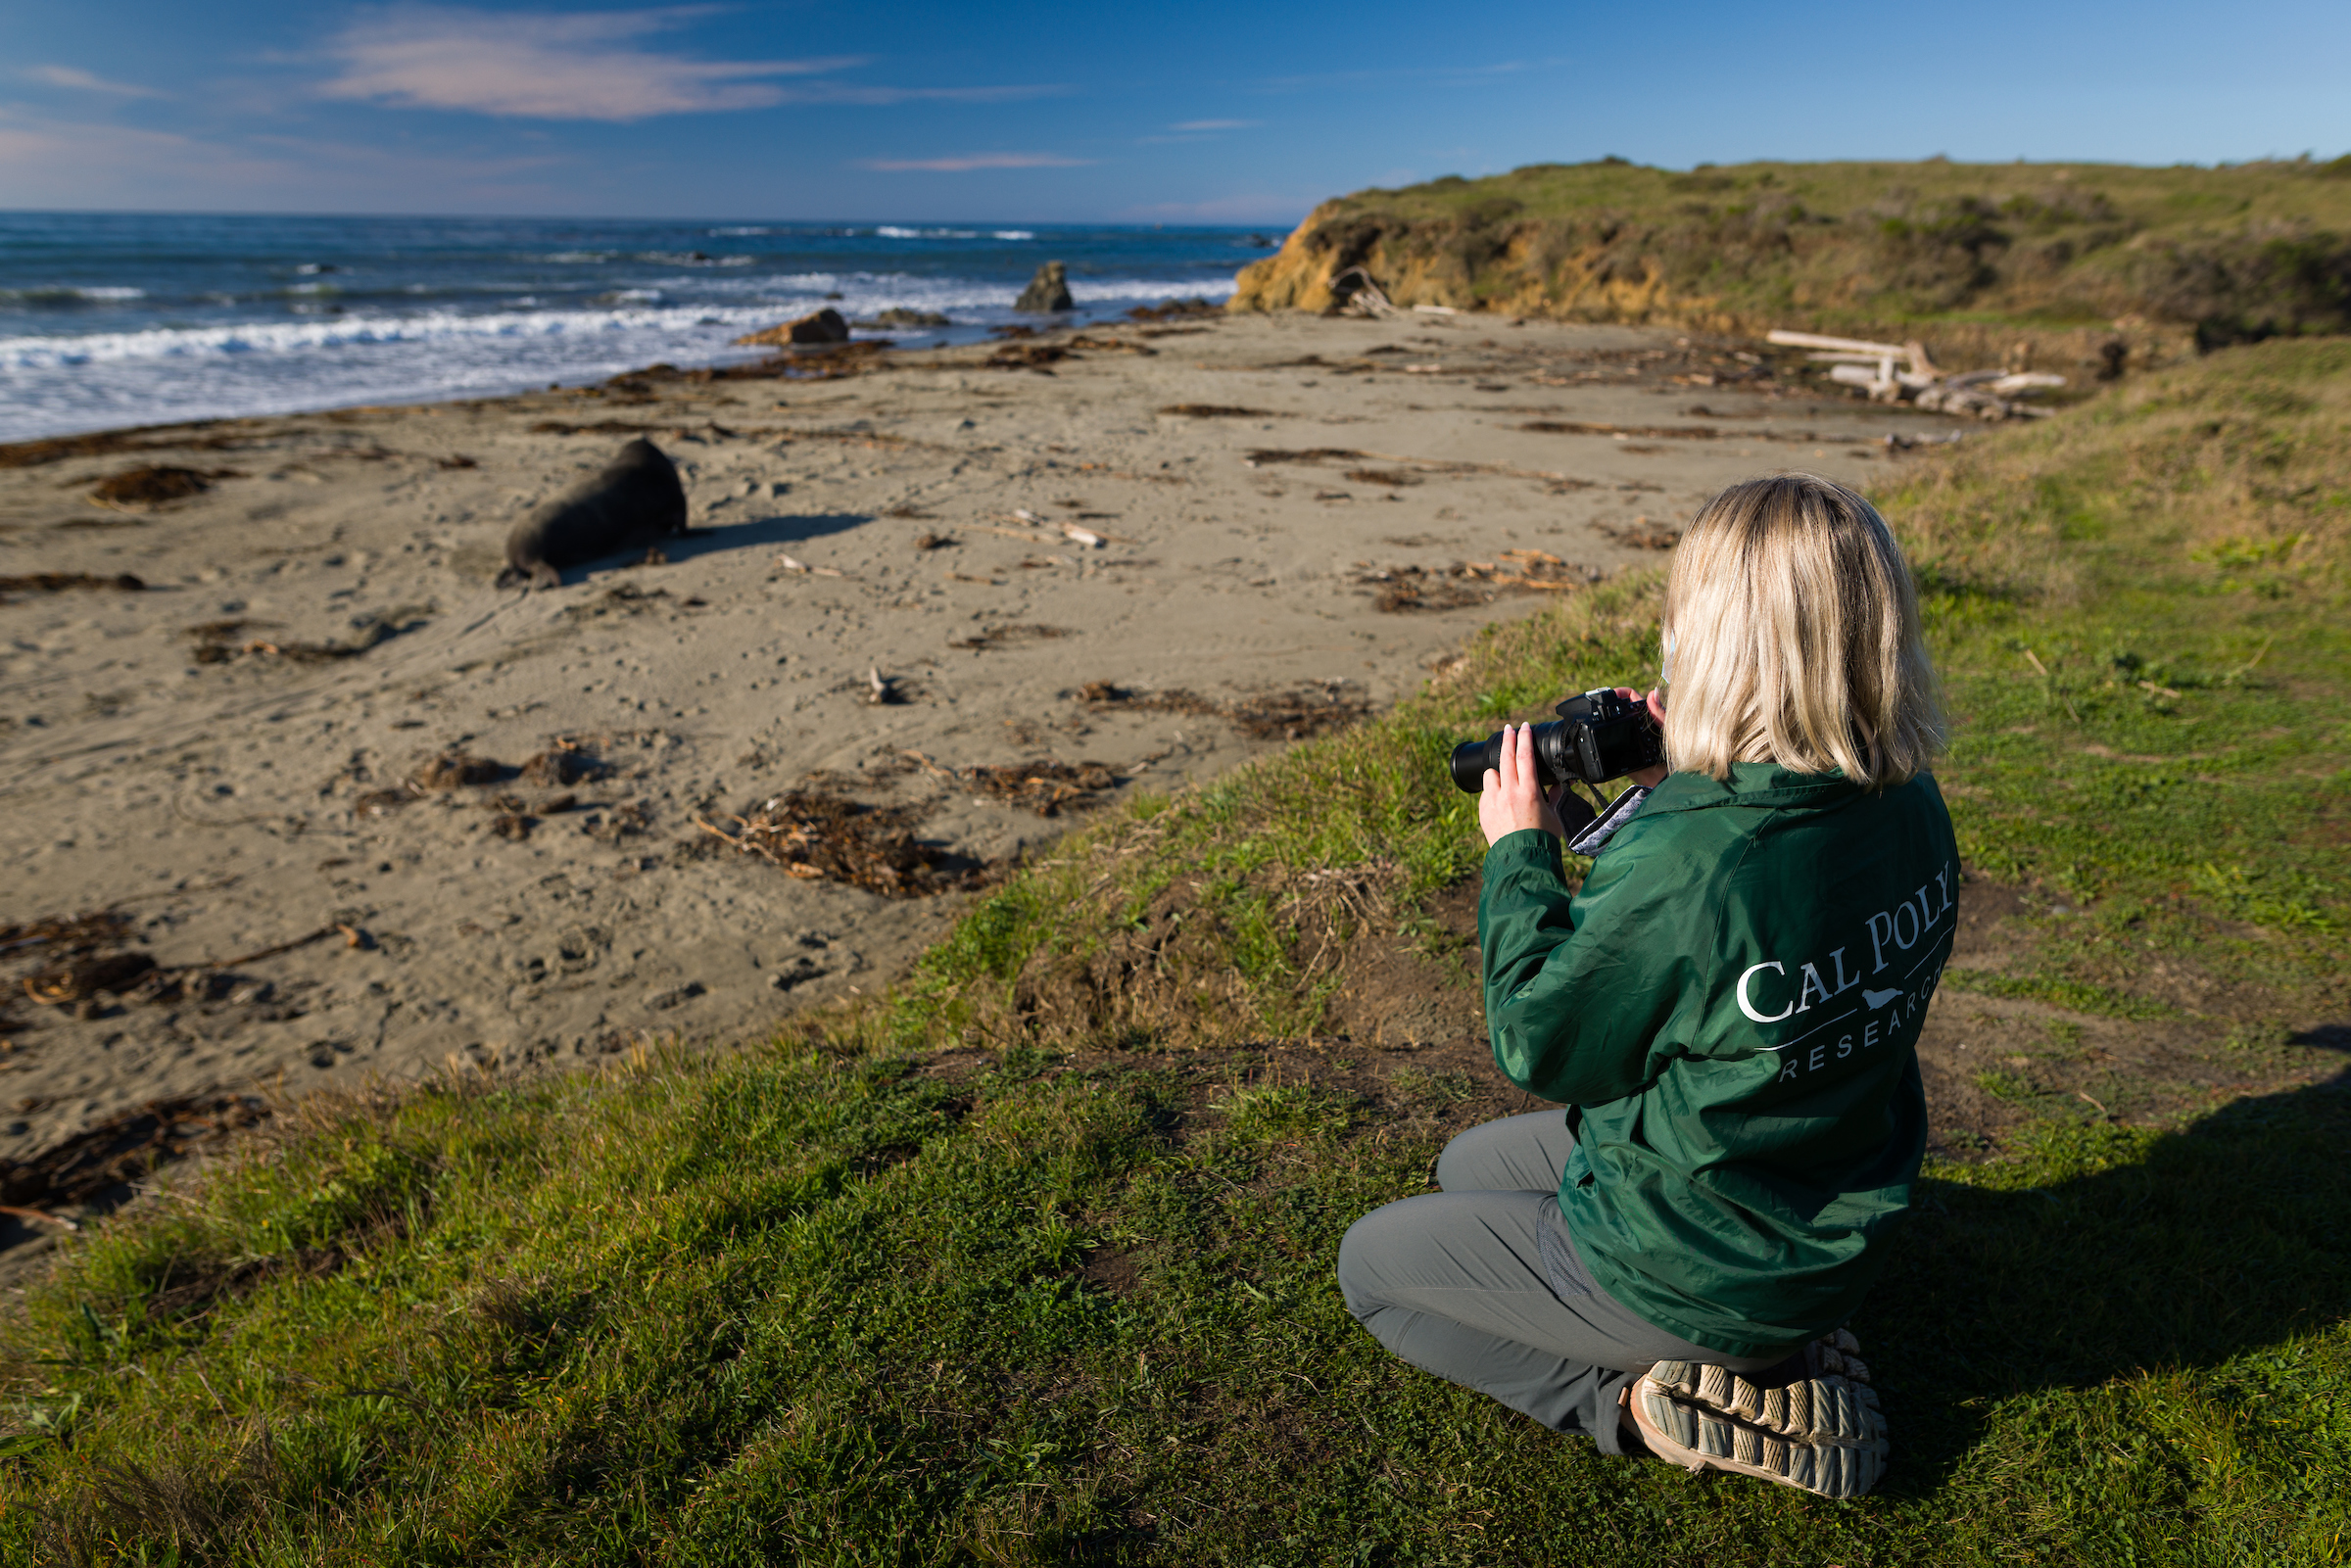 A student researcher observes elephant seals from afar. NMFS permit #22187-02